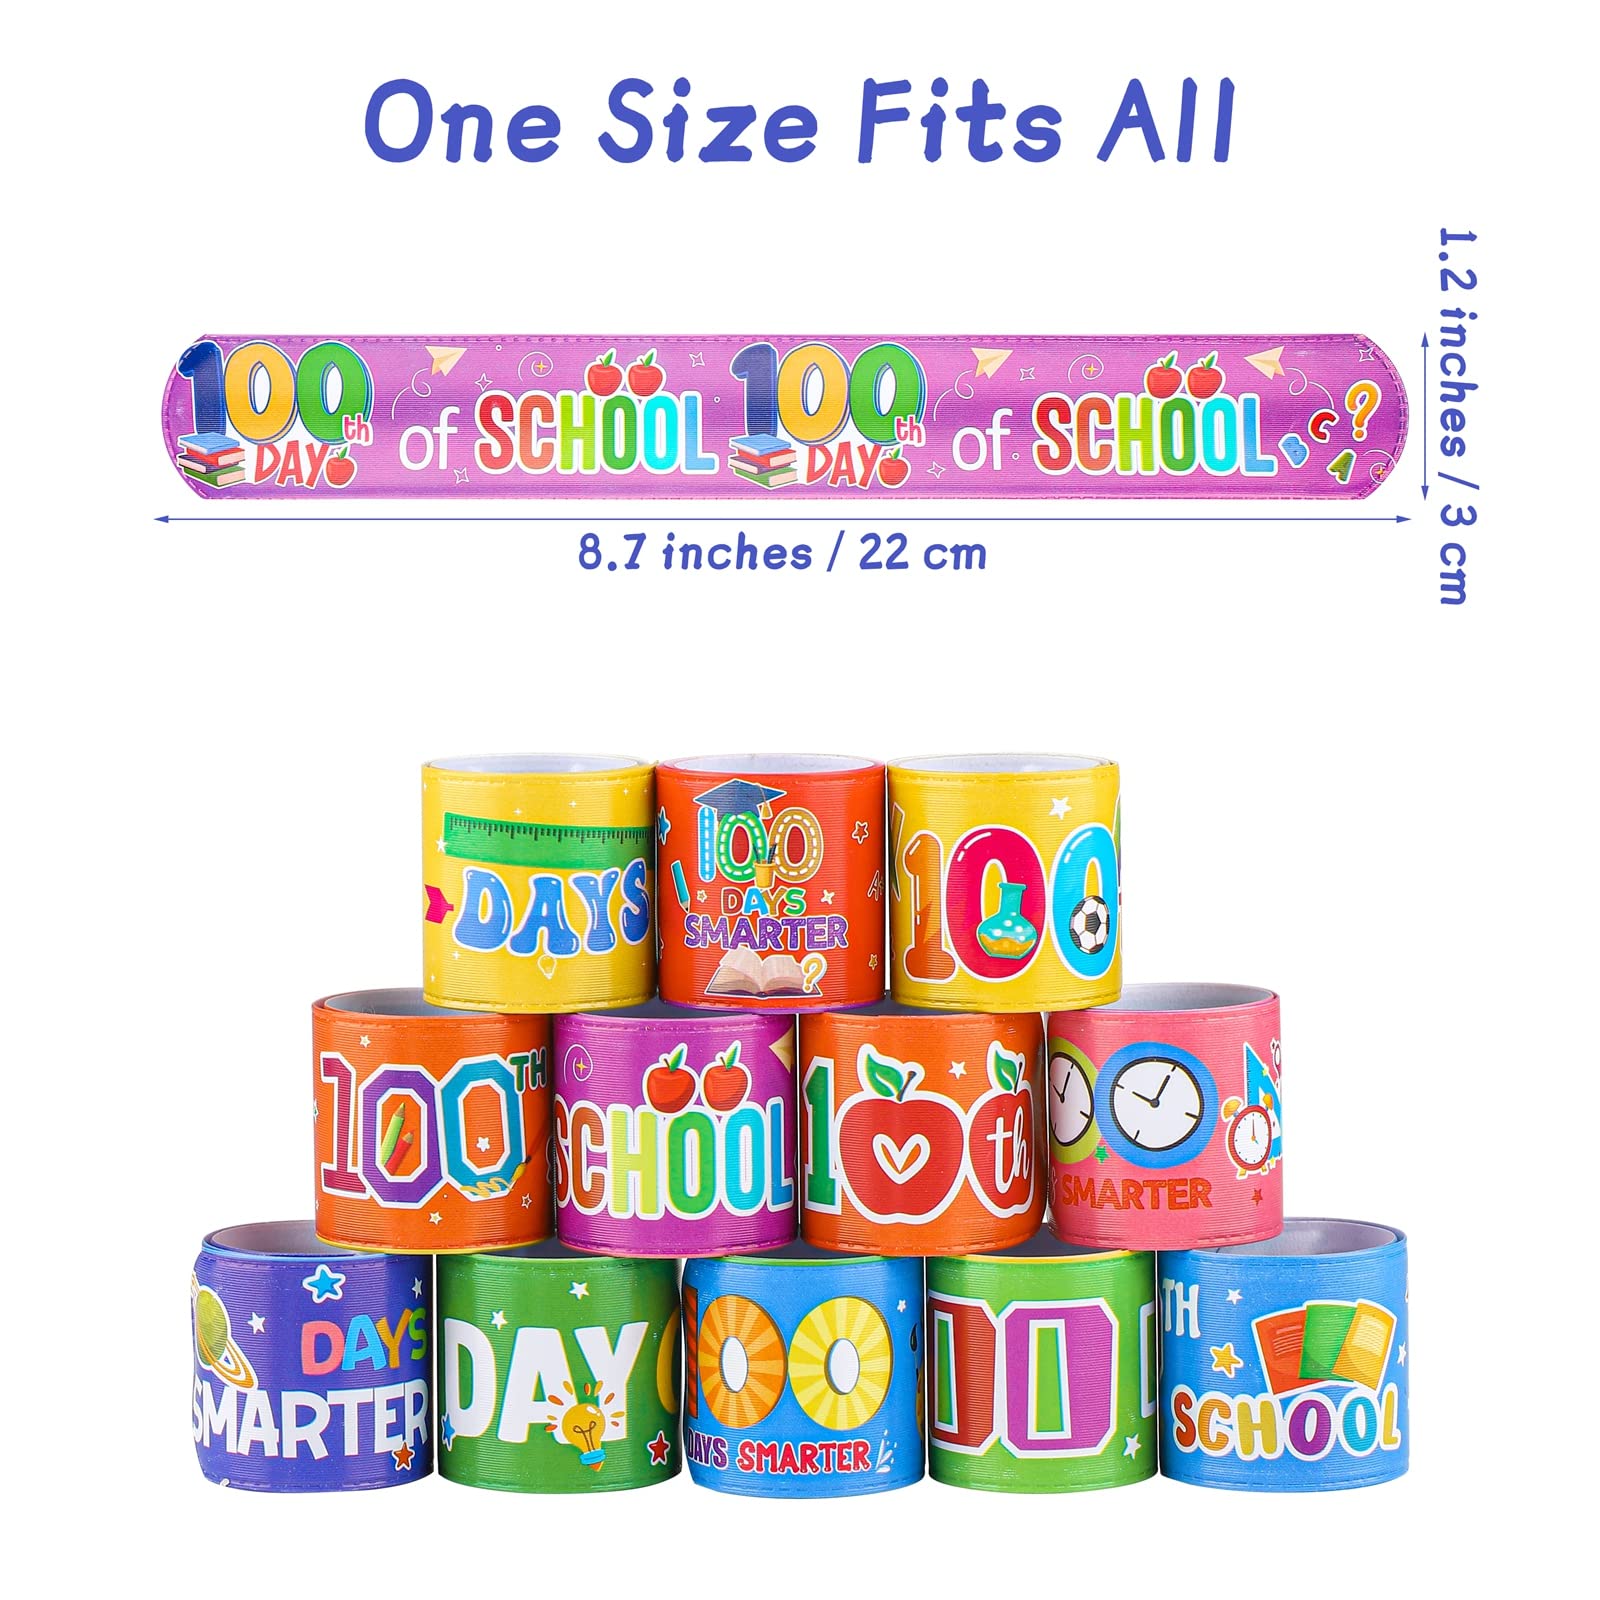 ADXCO 48 Pieces Happy 100th Day of School Slap Bracelets 100th Days School Snap Slip Wristband 12 Assorted Styles Slap Bands Party Favors for School Classroom Prizes Birthday Gifts